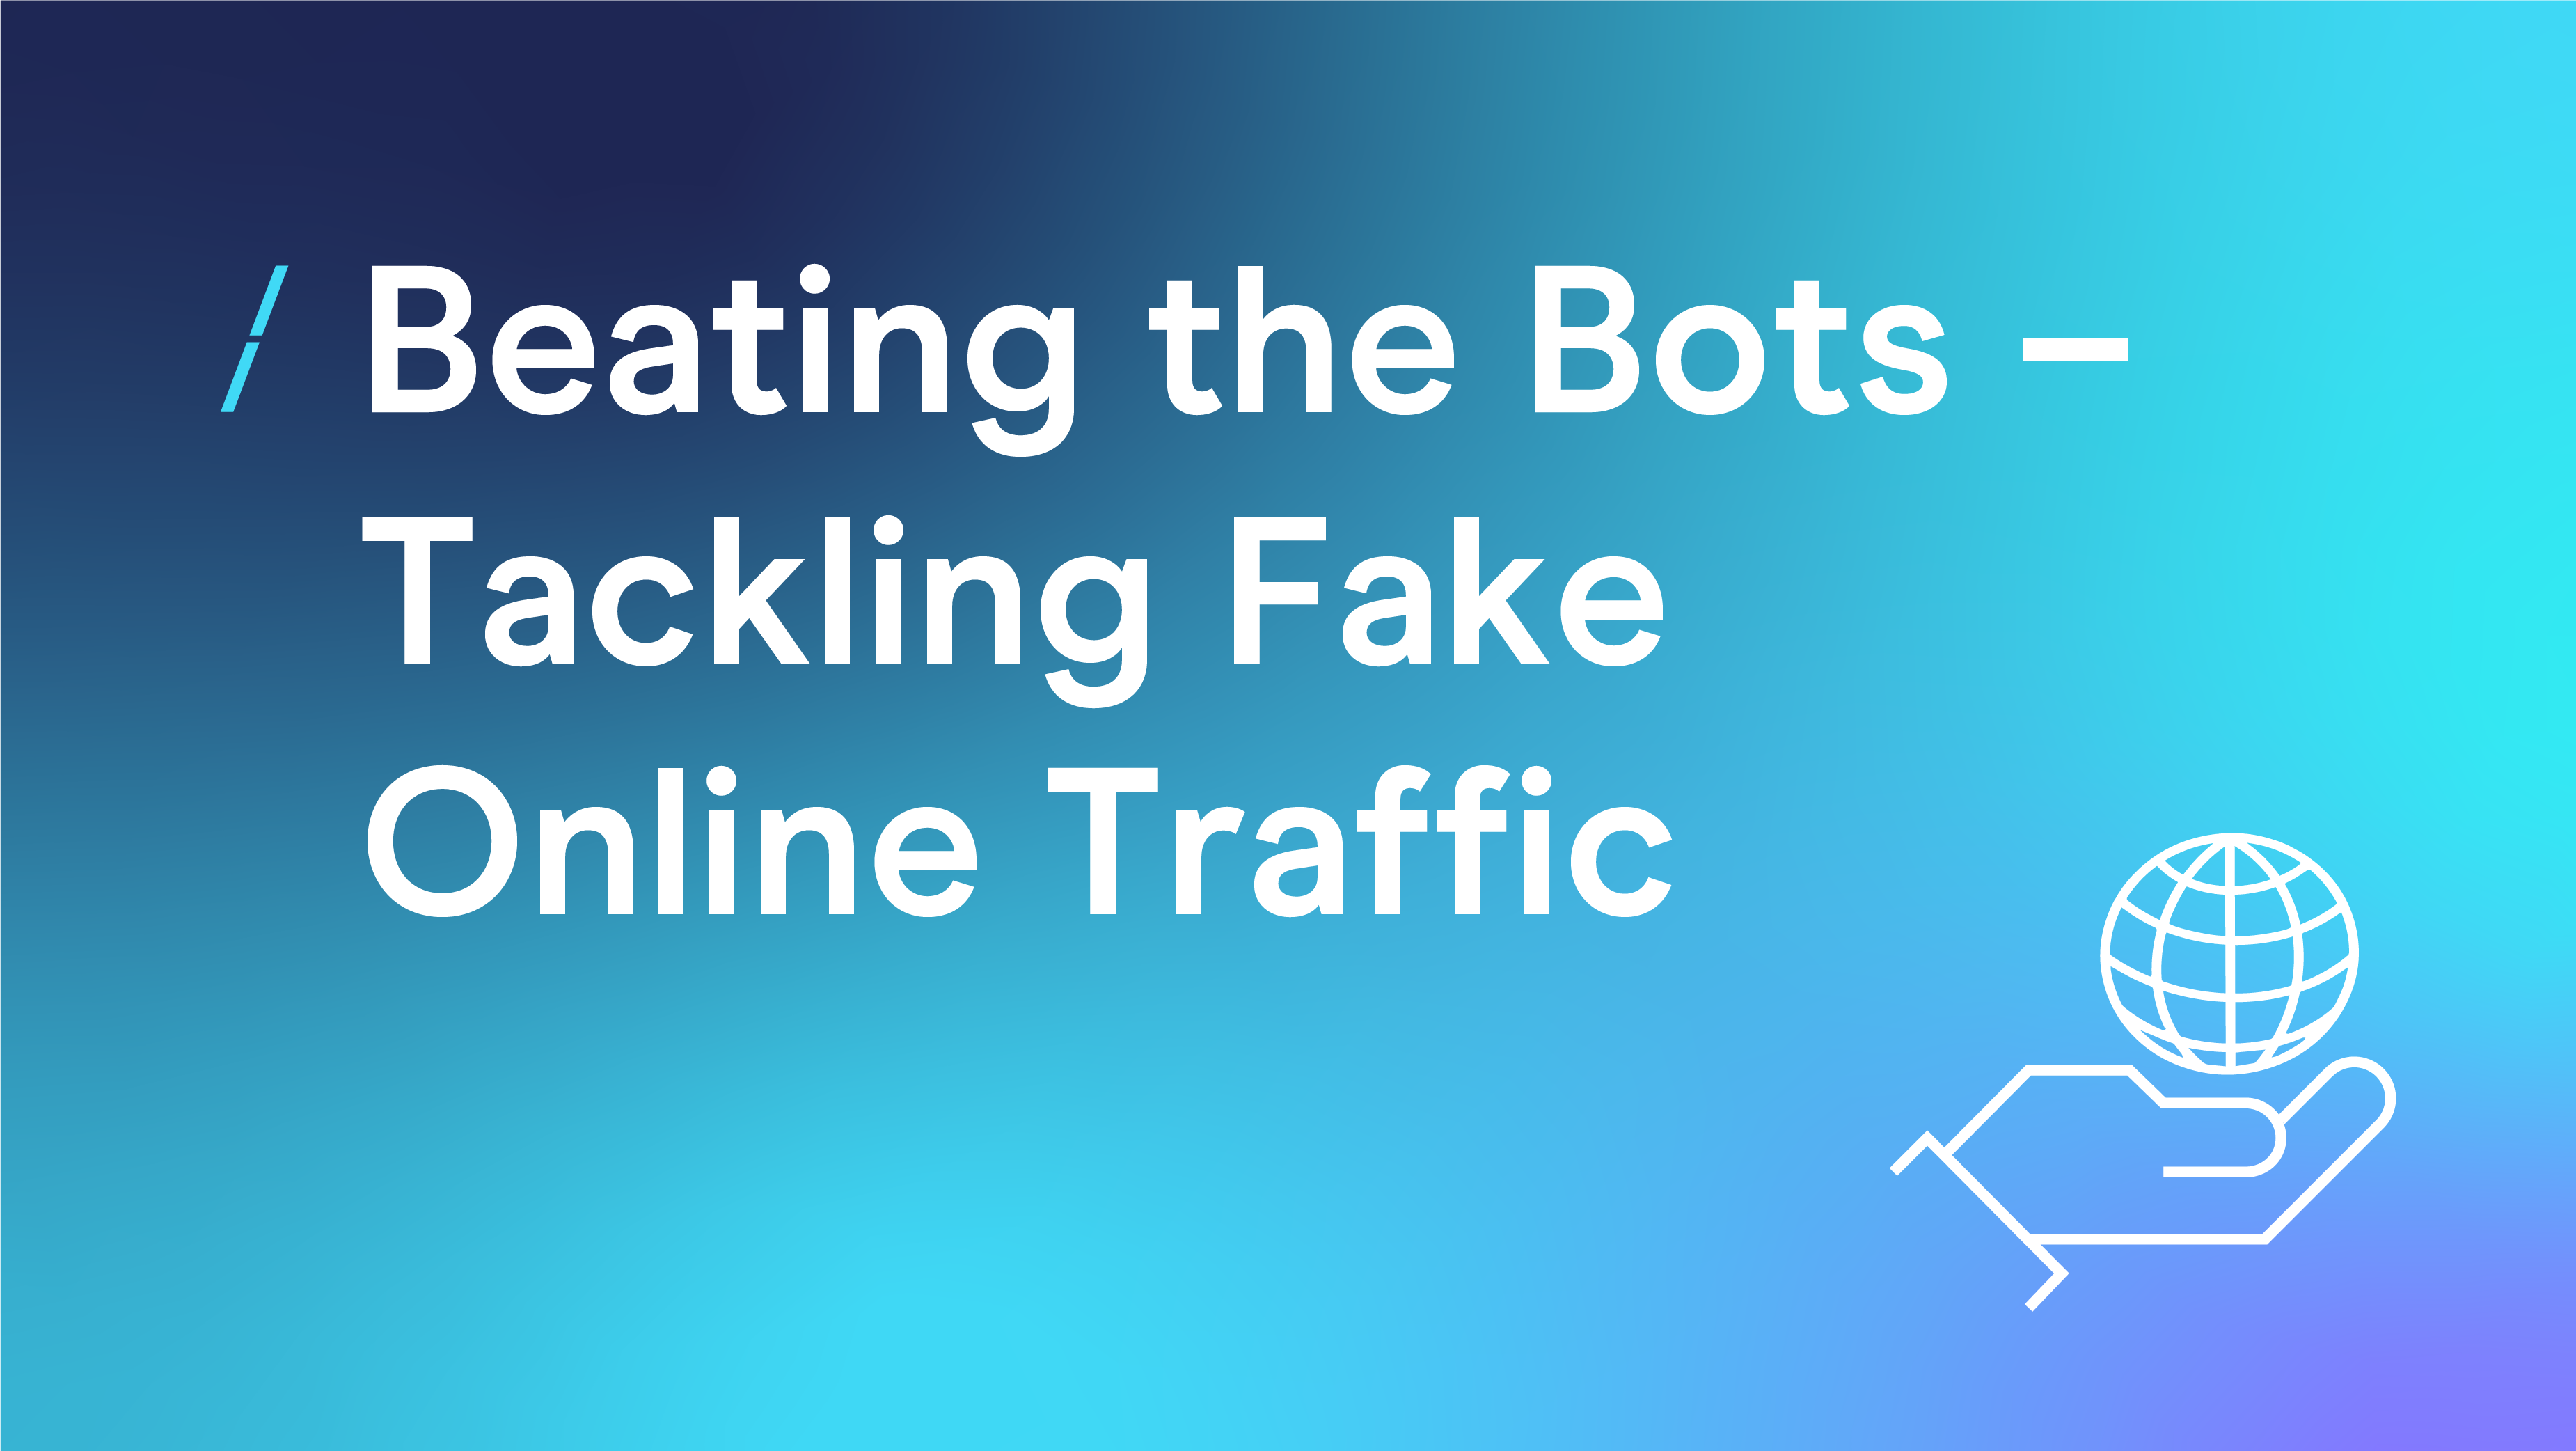 Beating the Bots  Tackling Fake Online Traffic_General articles_RM Committee.png